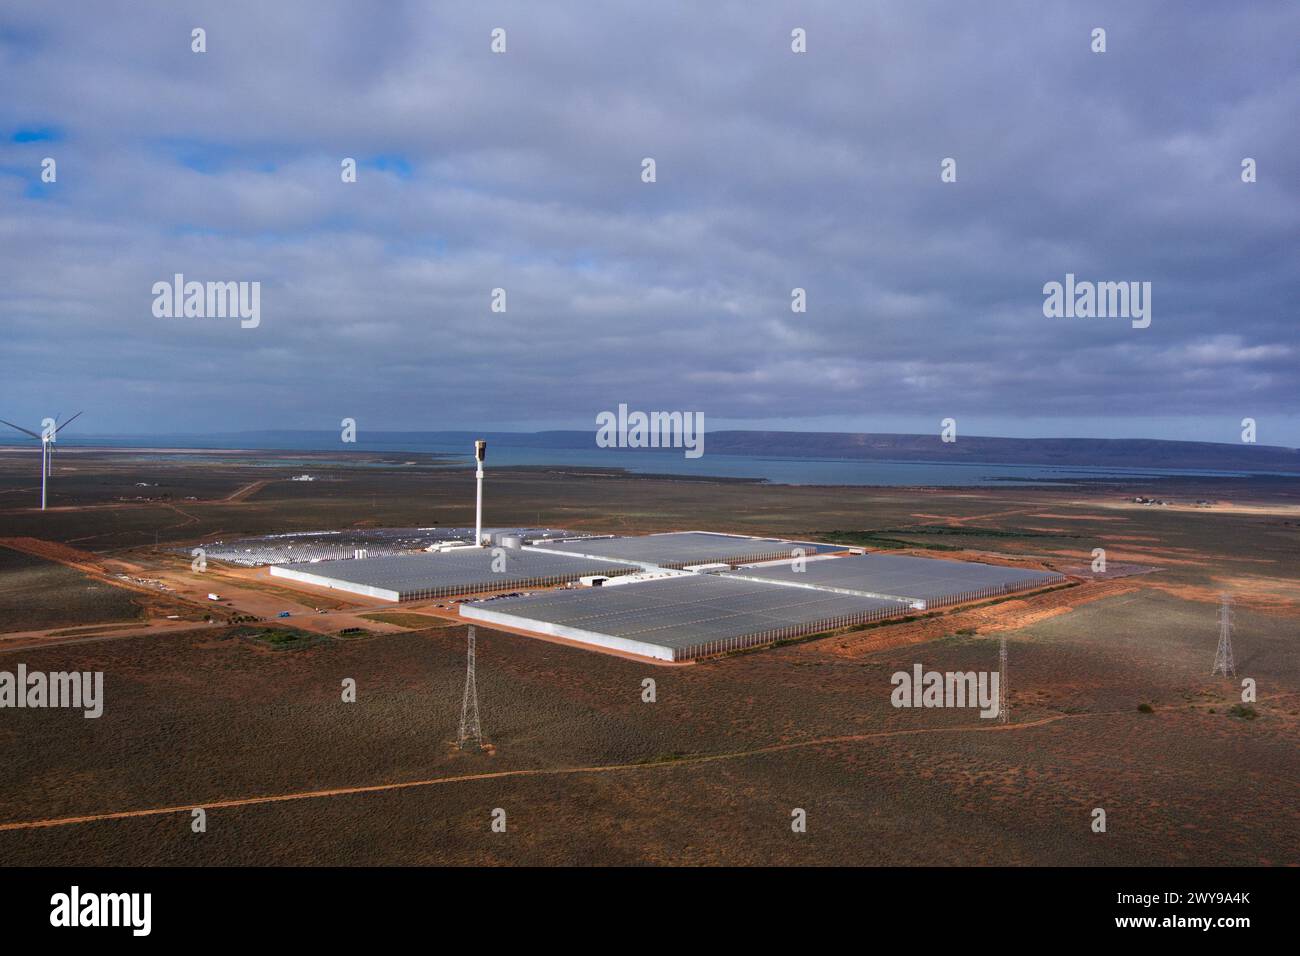 Aerial of Sundrop Farms Operation at Port Augusta South Australia Stock Photo